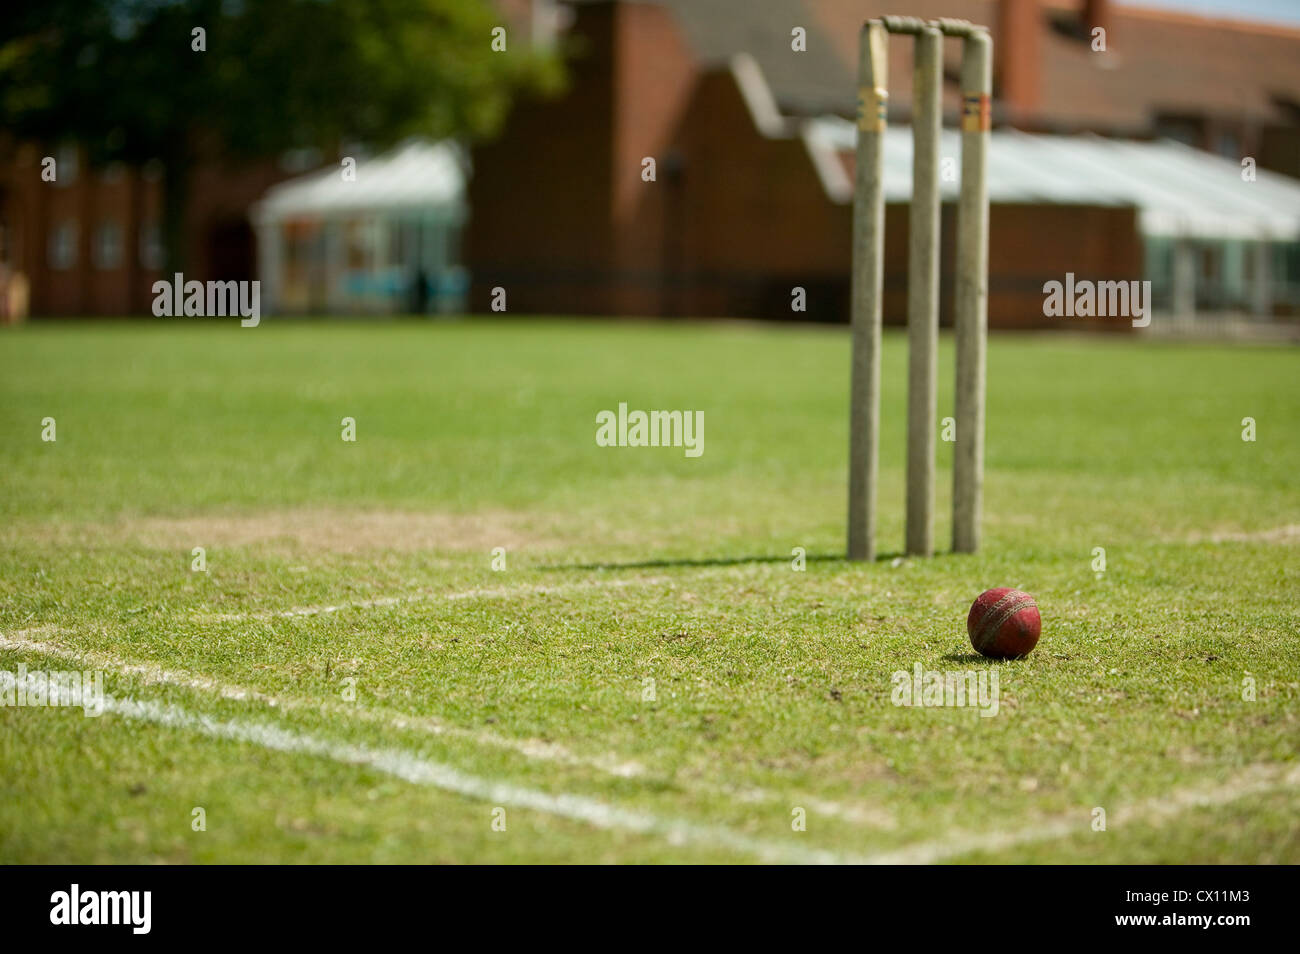 Cricket stumps and ball on grass pitch Stock Photo